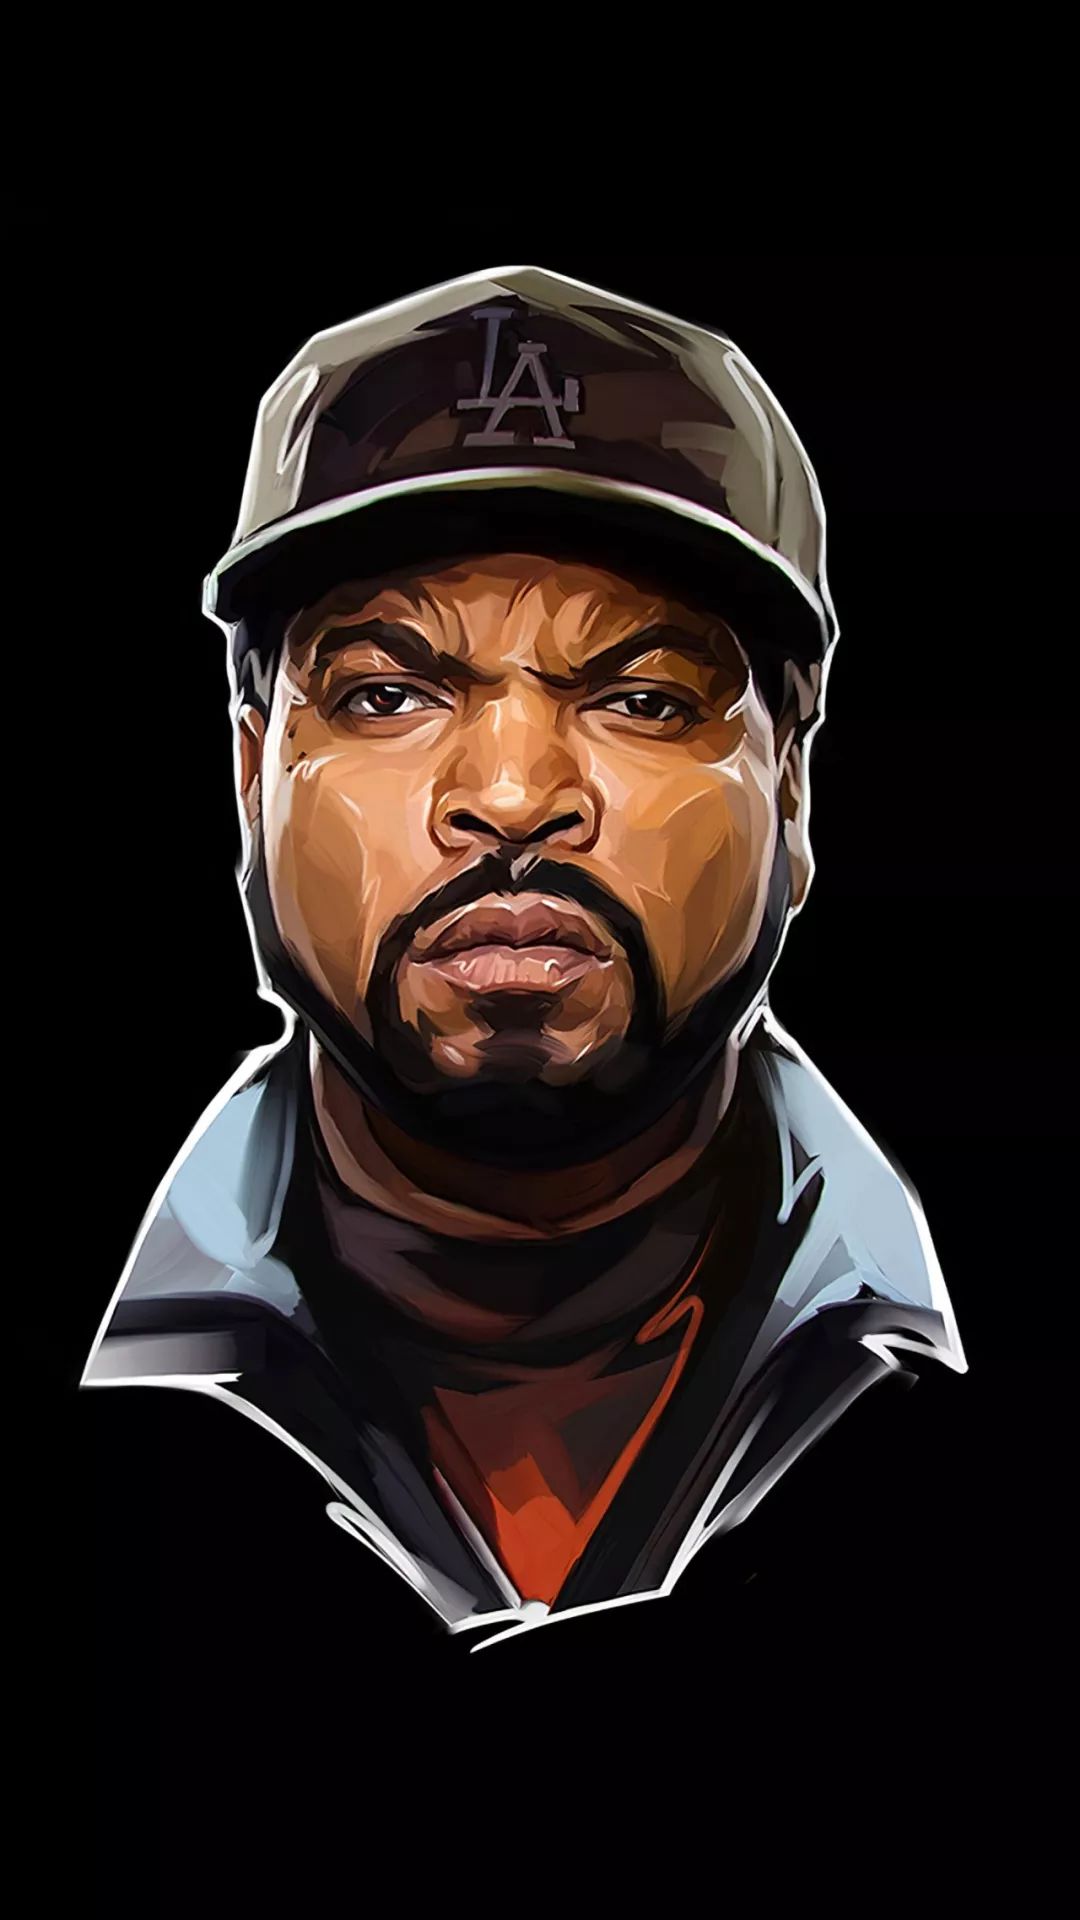 Ice Cube Rapper Wallpapers